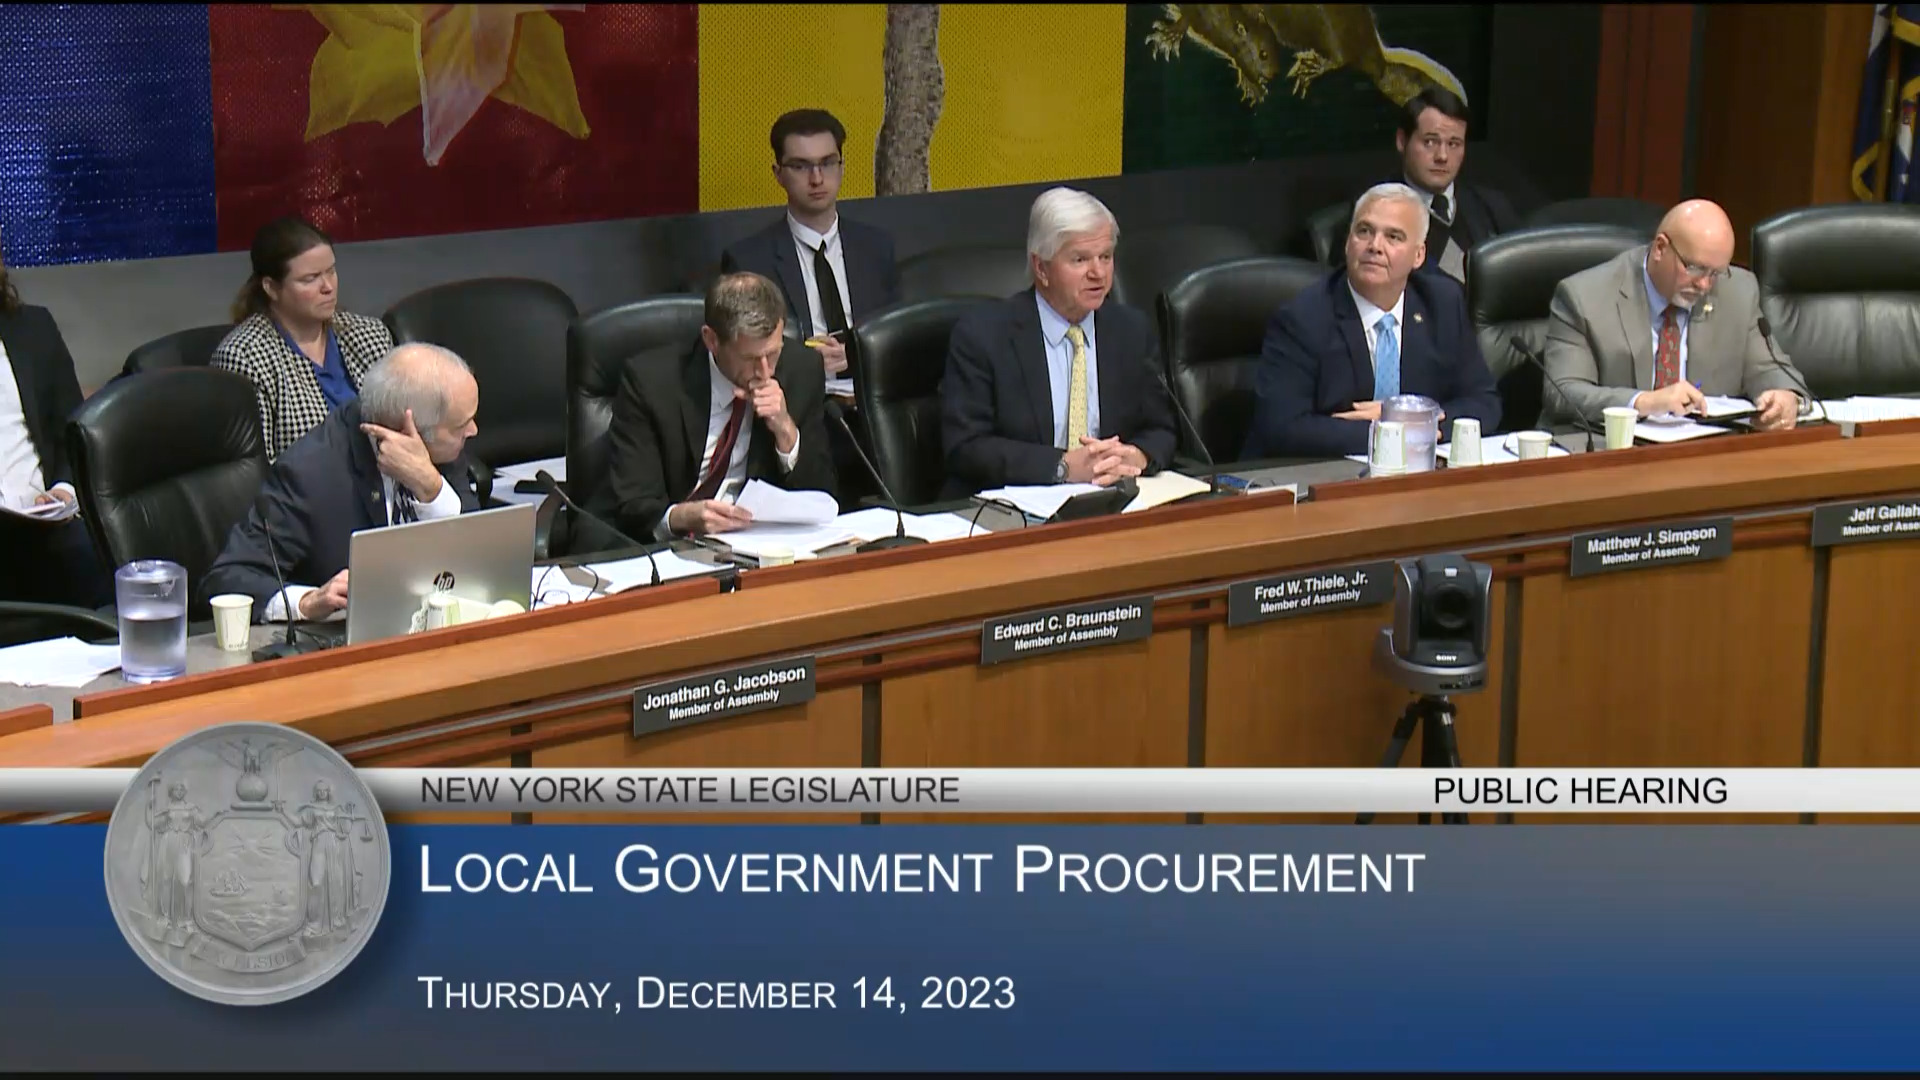 Engineering Experts Testify at Public Hearing on Local Government Procurement